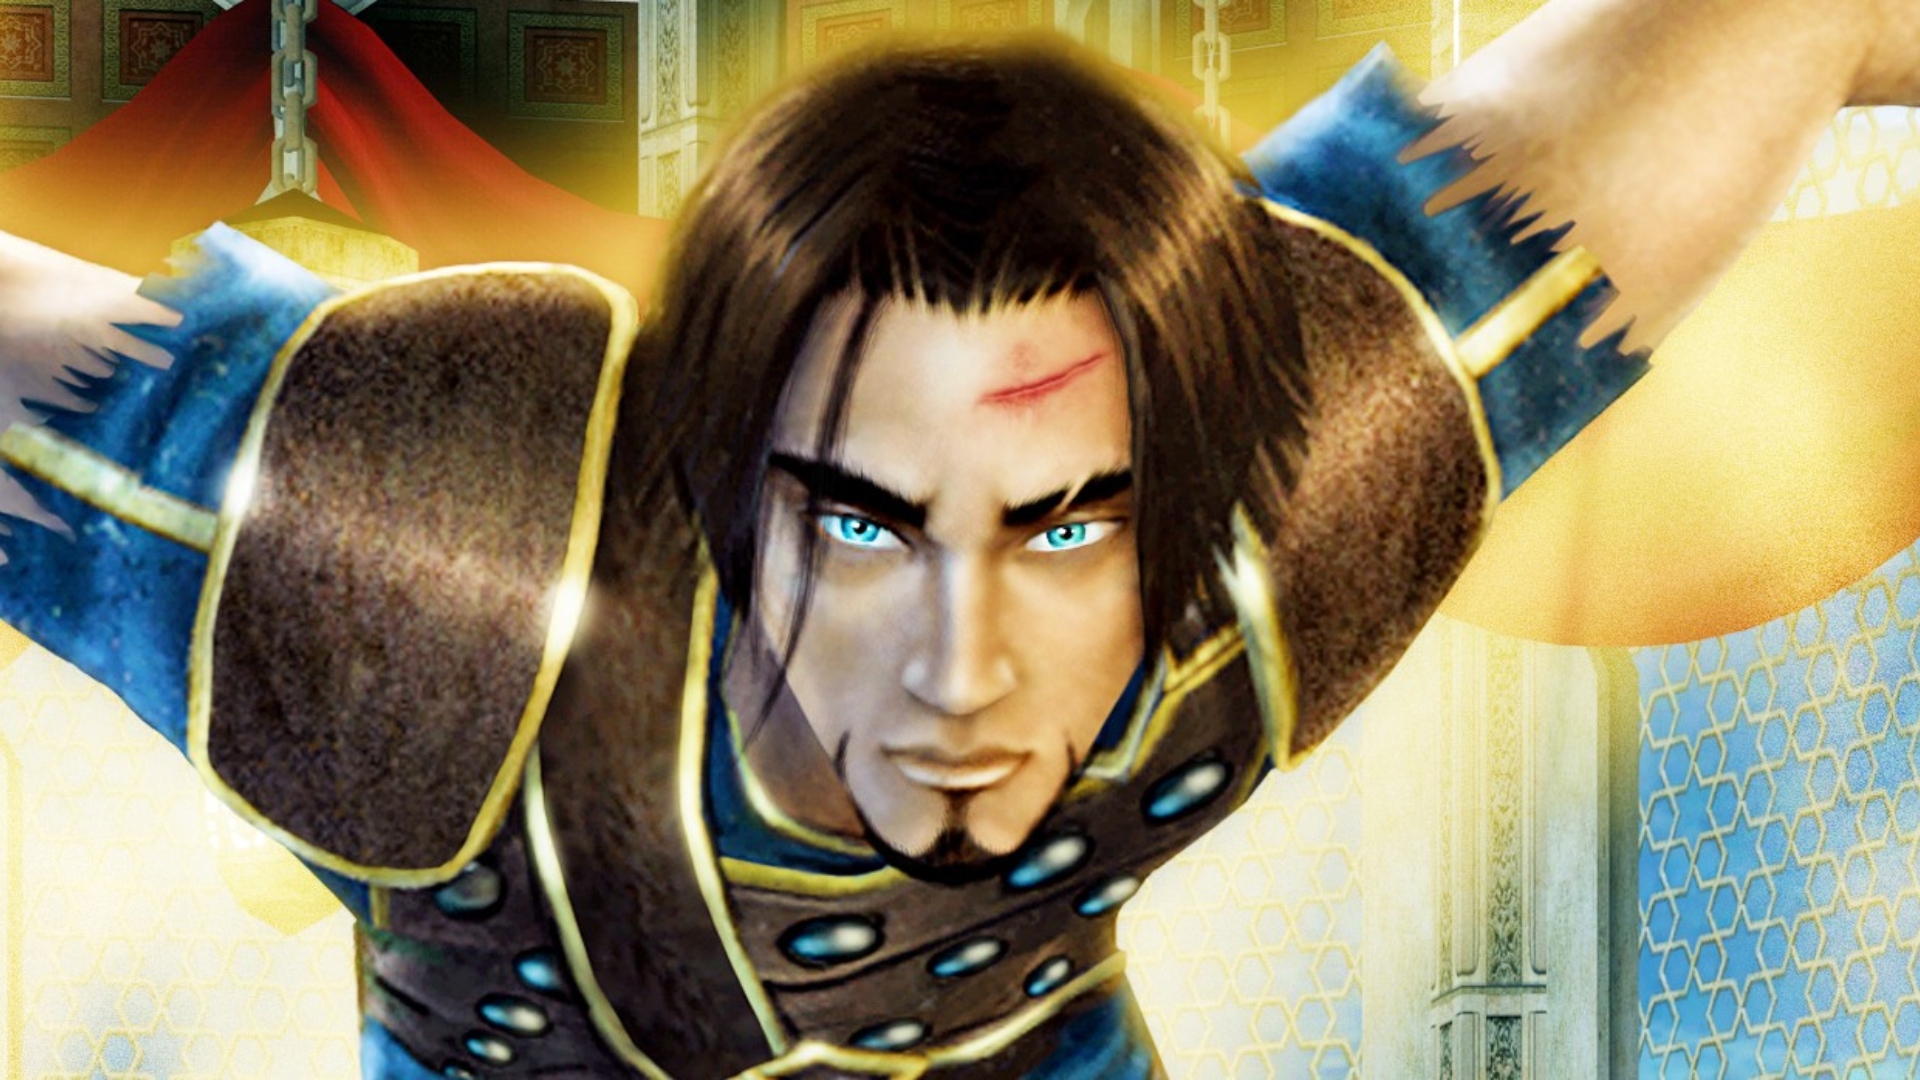 Prince of Persia: Warrior Within at the best price